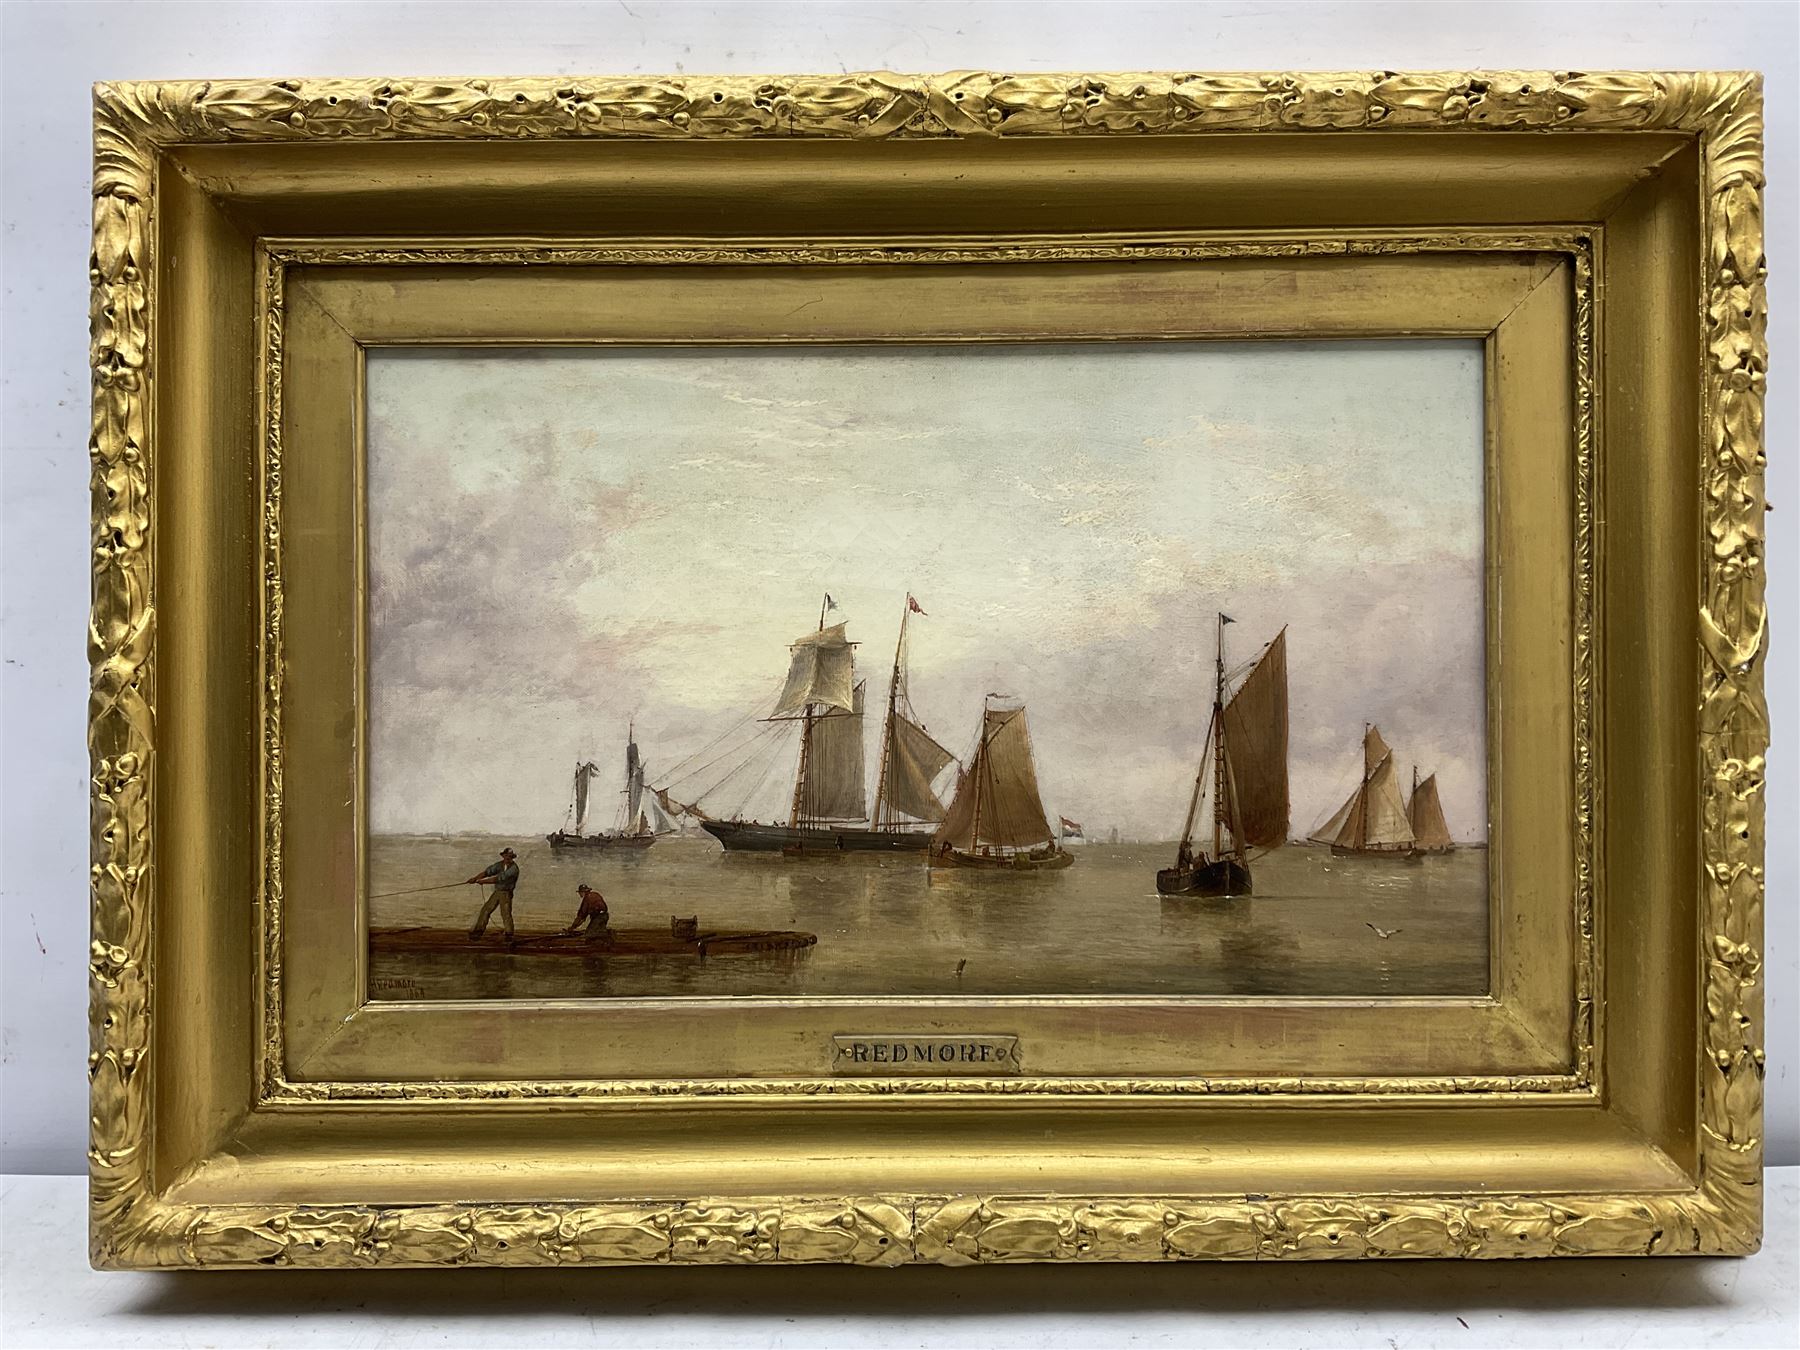 Henry Redmore (British 1820-1887): Sailing Vessels in a Calm Estuary - Image 2 of 4